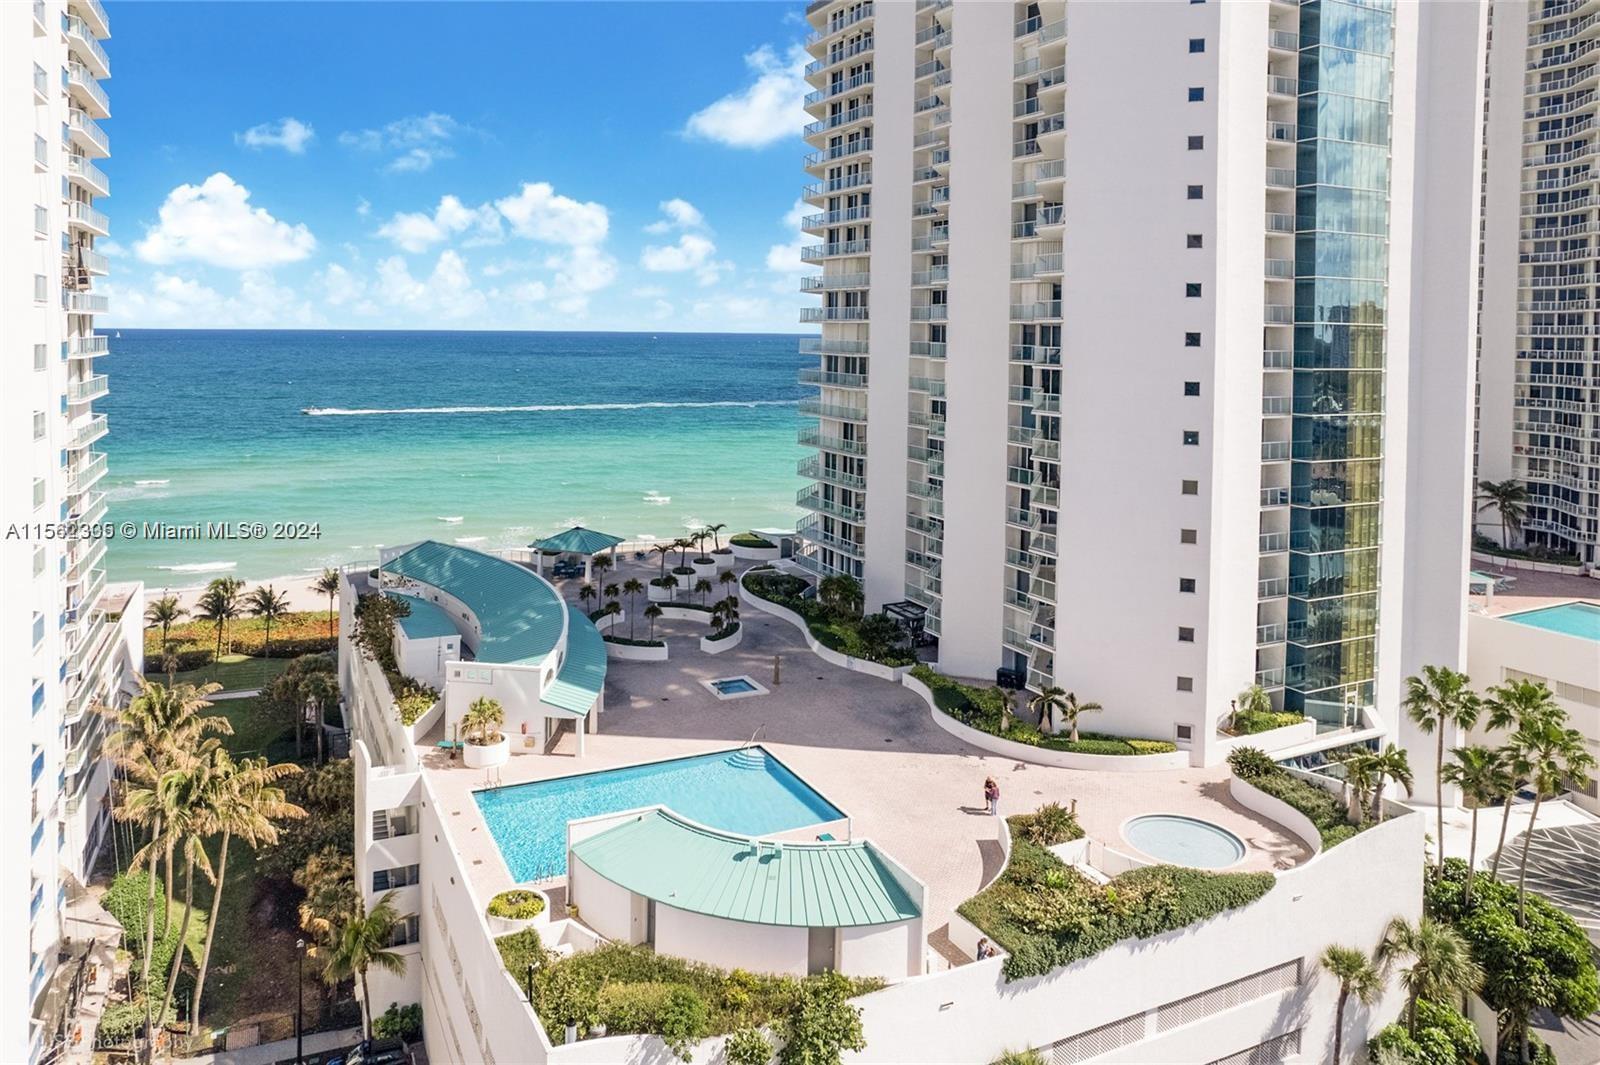 This unique 3 bedroom 3.5 bath oceanfront residence located in prestigious Sunny Isles offers an ove